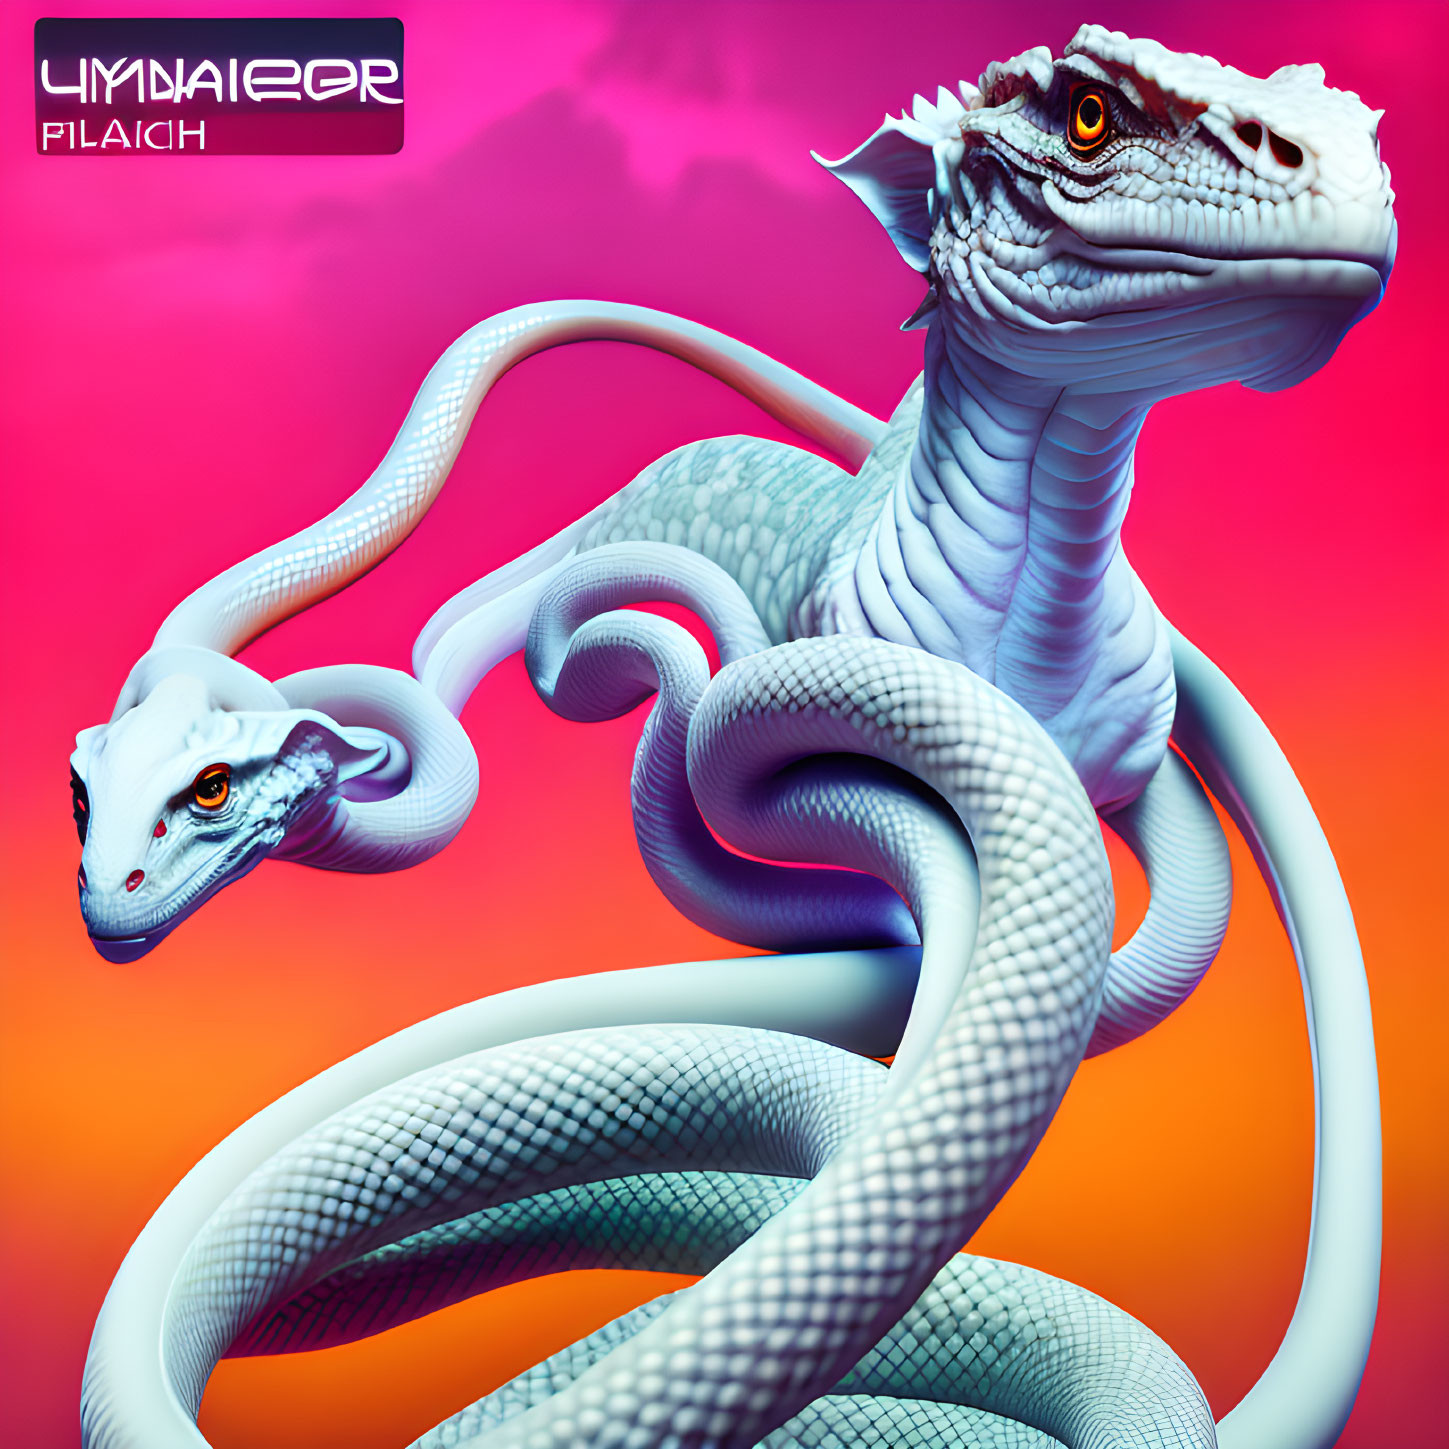 Digital artwork: intertwined snakes with humanoid features and Cyrillic text on hot pink background